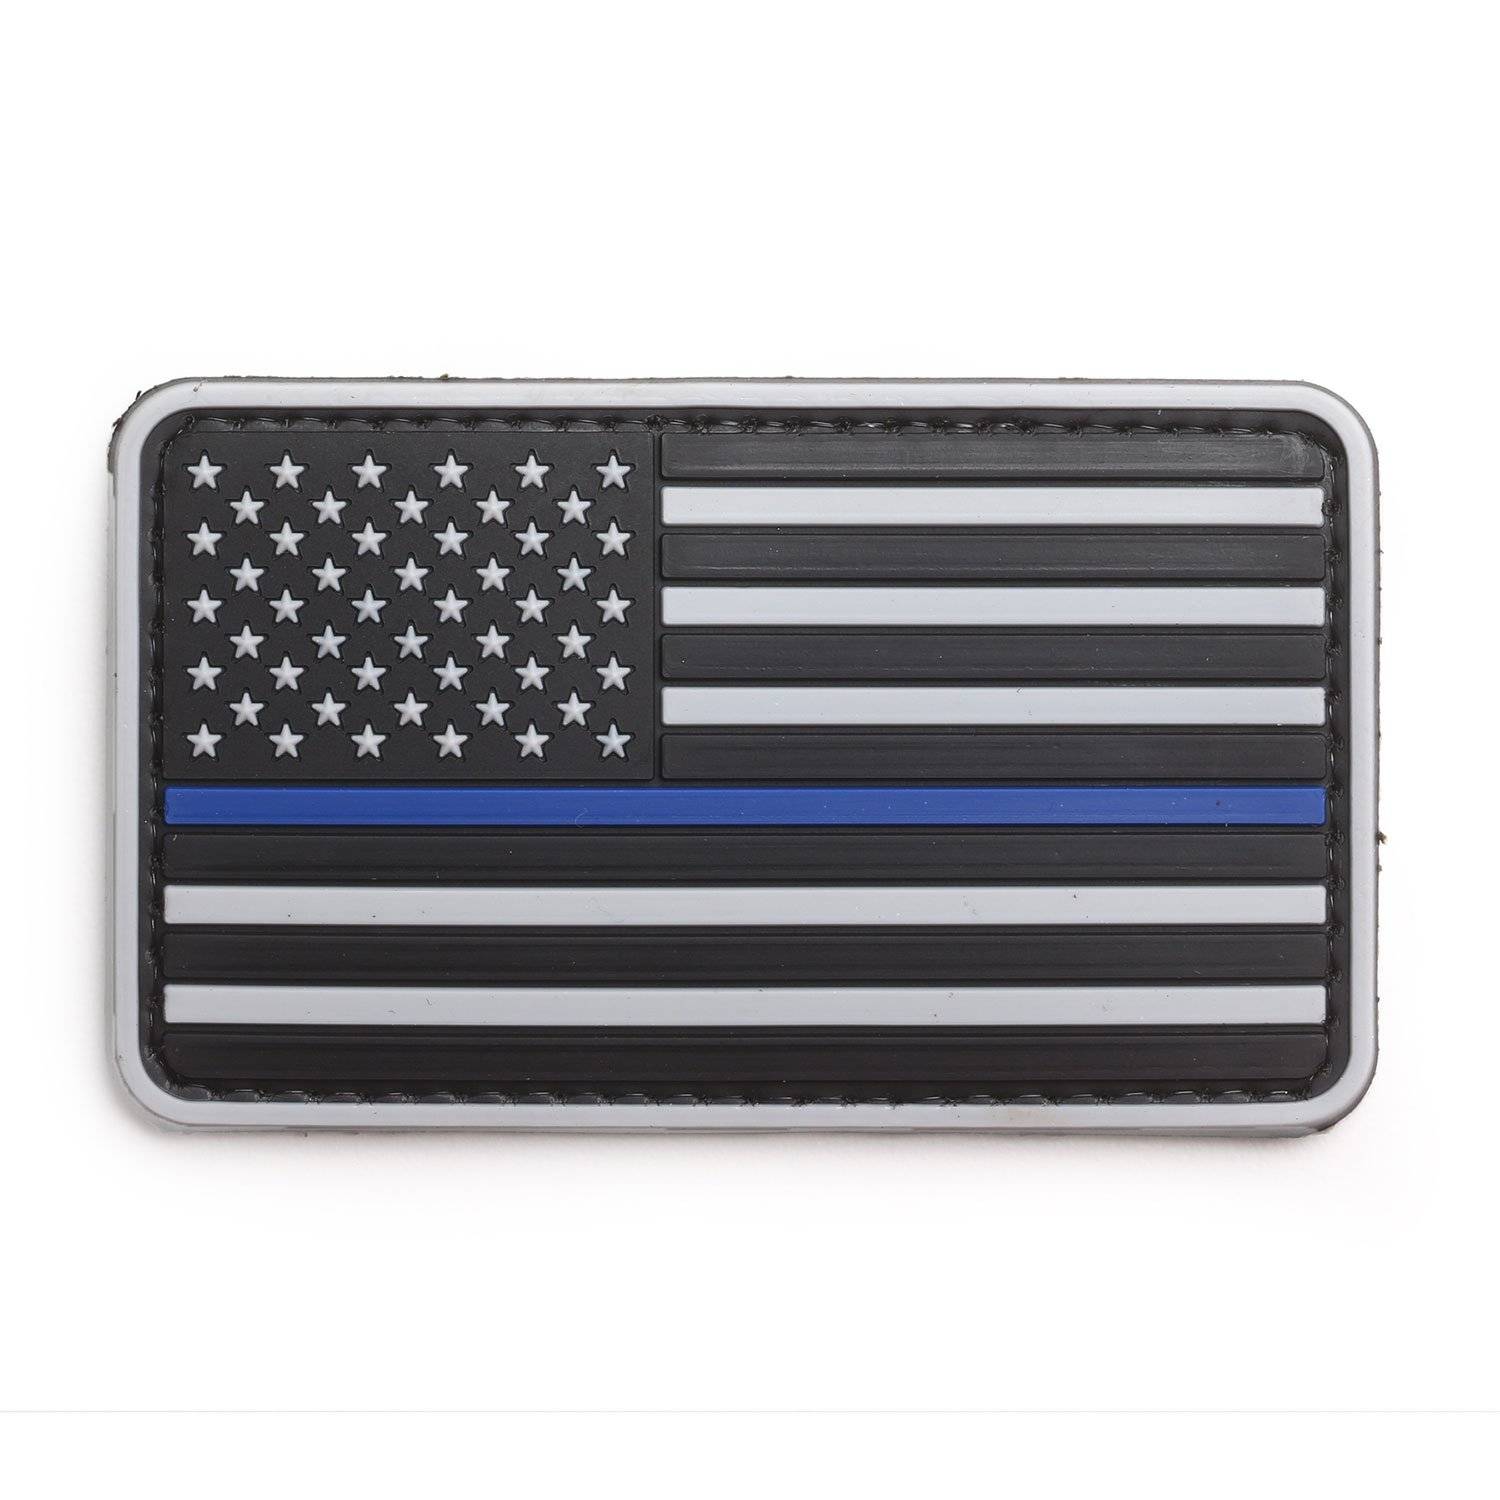 5ive Star Gear “Thin Blue Line Flag” Morale Patch